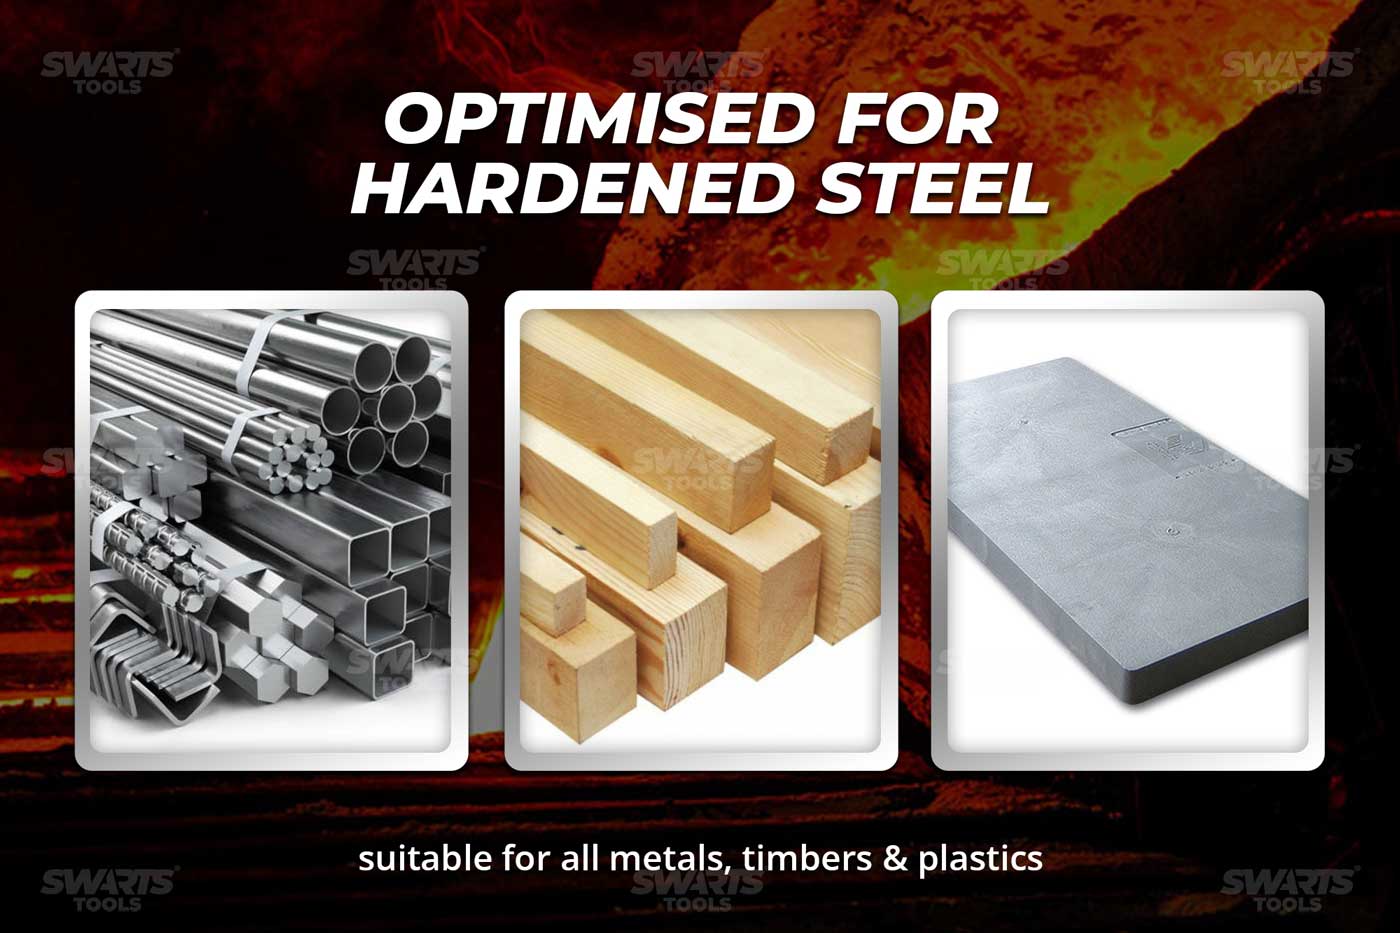 Suitable for all metals, timbers and plastics